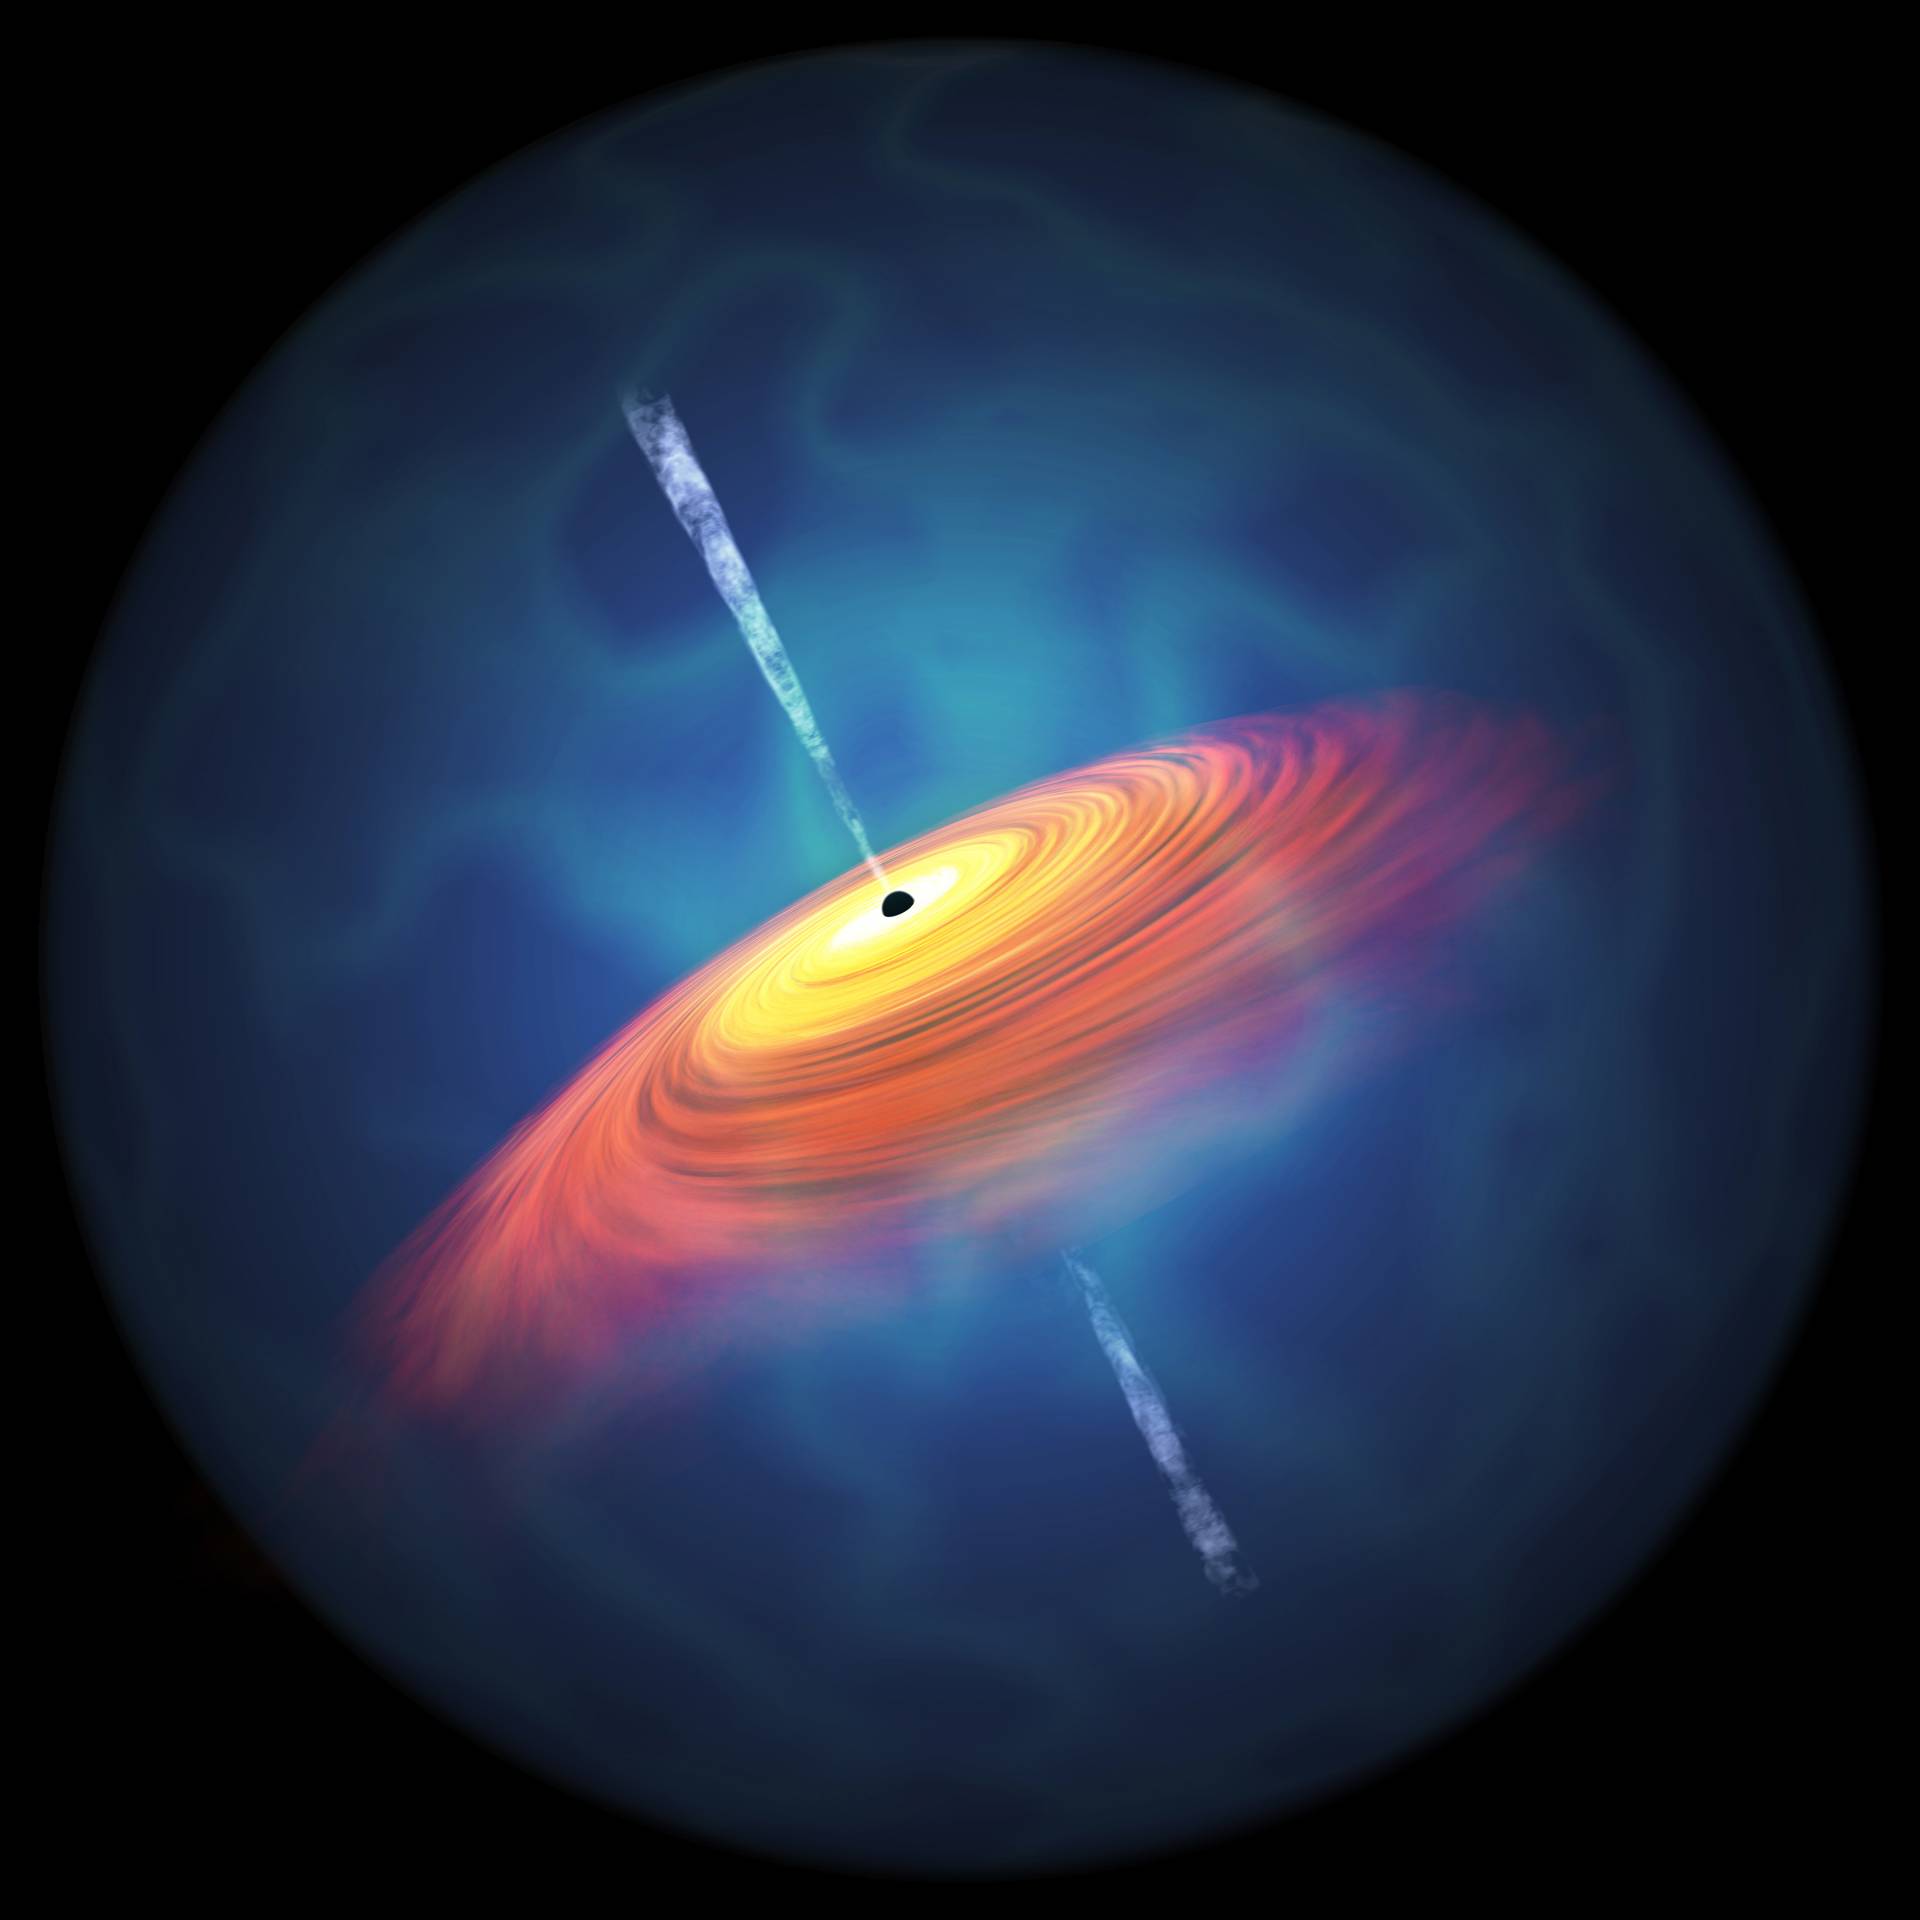 An artist impression of a quasar: A red and orange swirl on a blue background